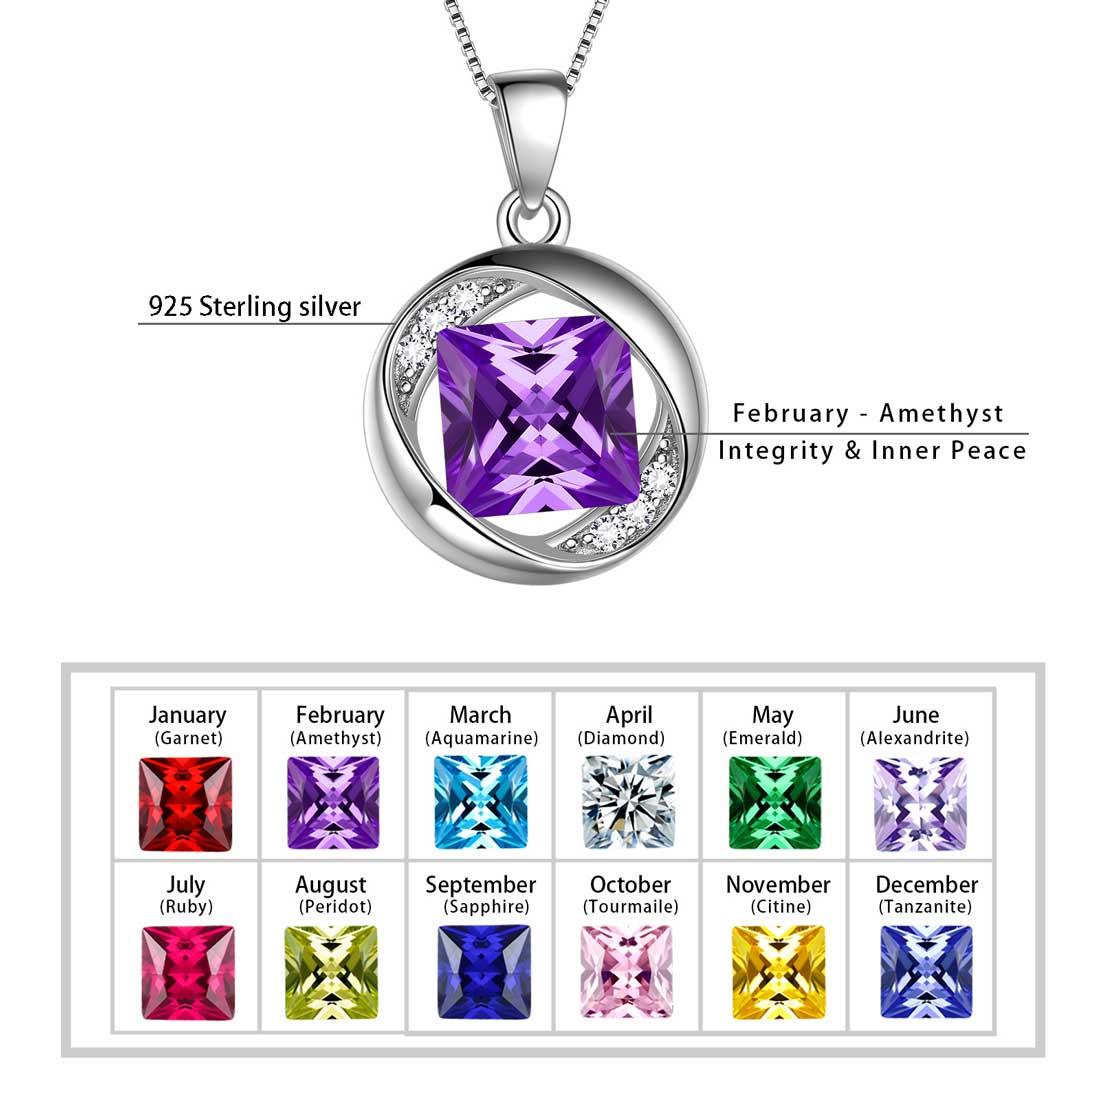 Round Birthstone February Amethyst Necklace Pendant - Necklaces - Aurora Tears